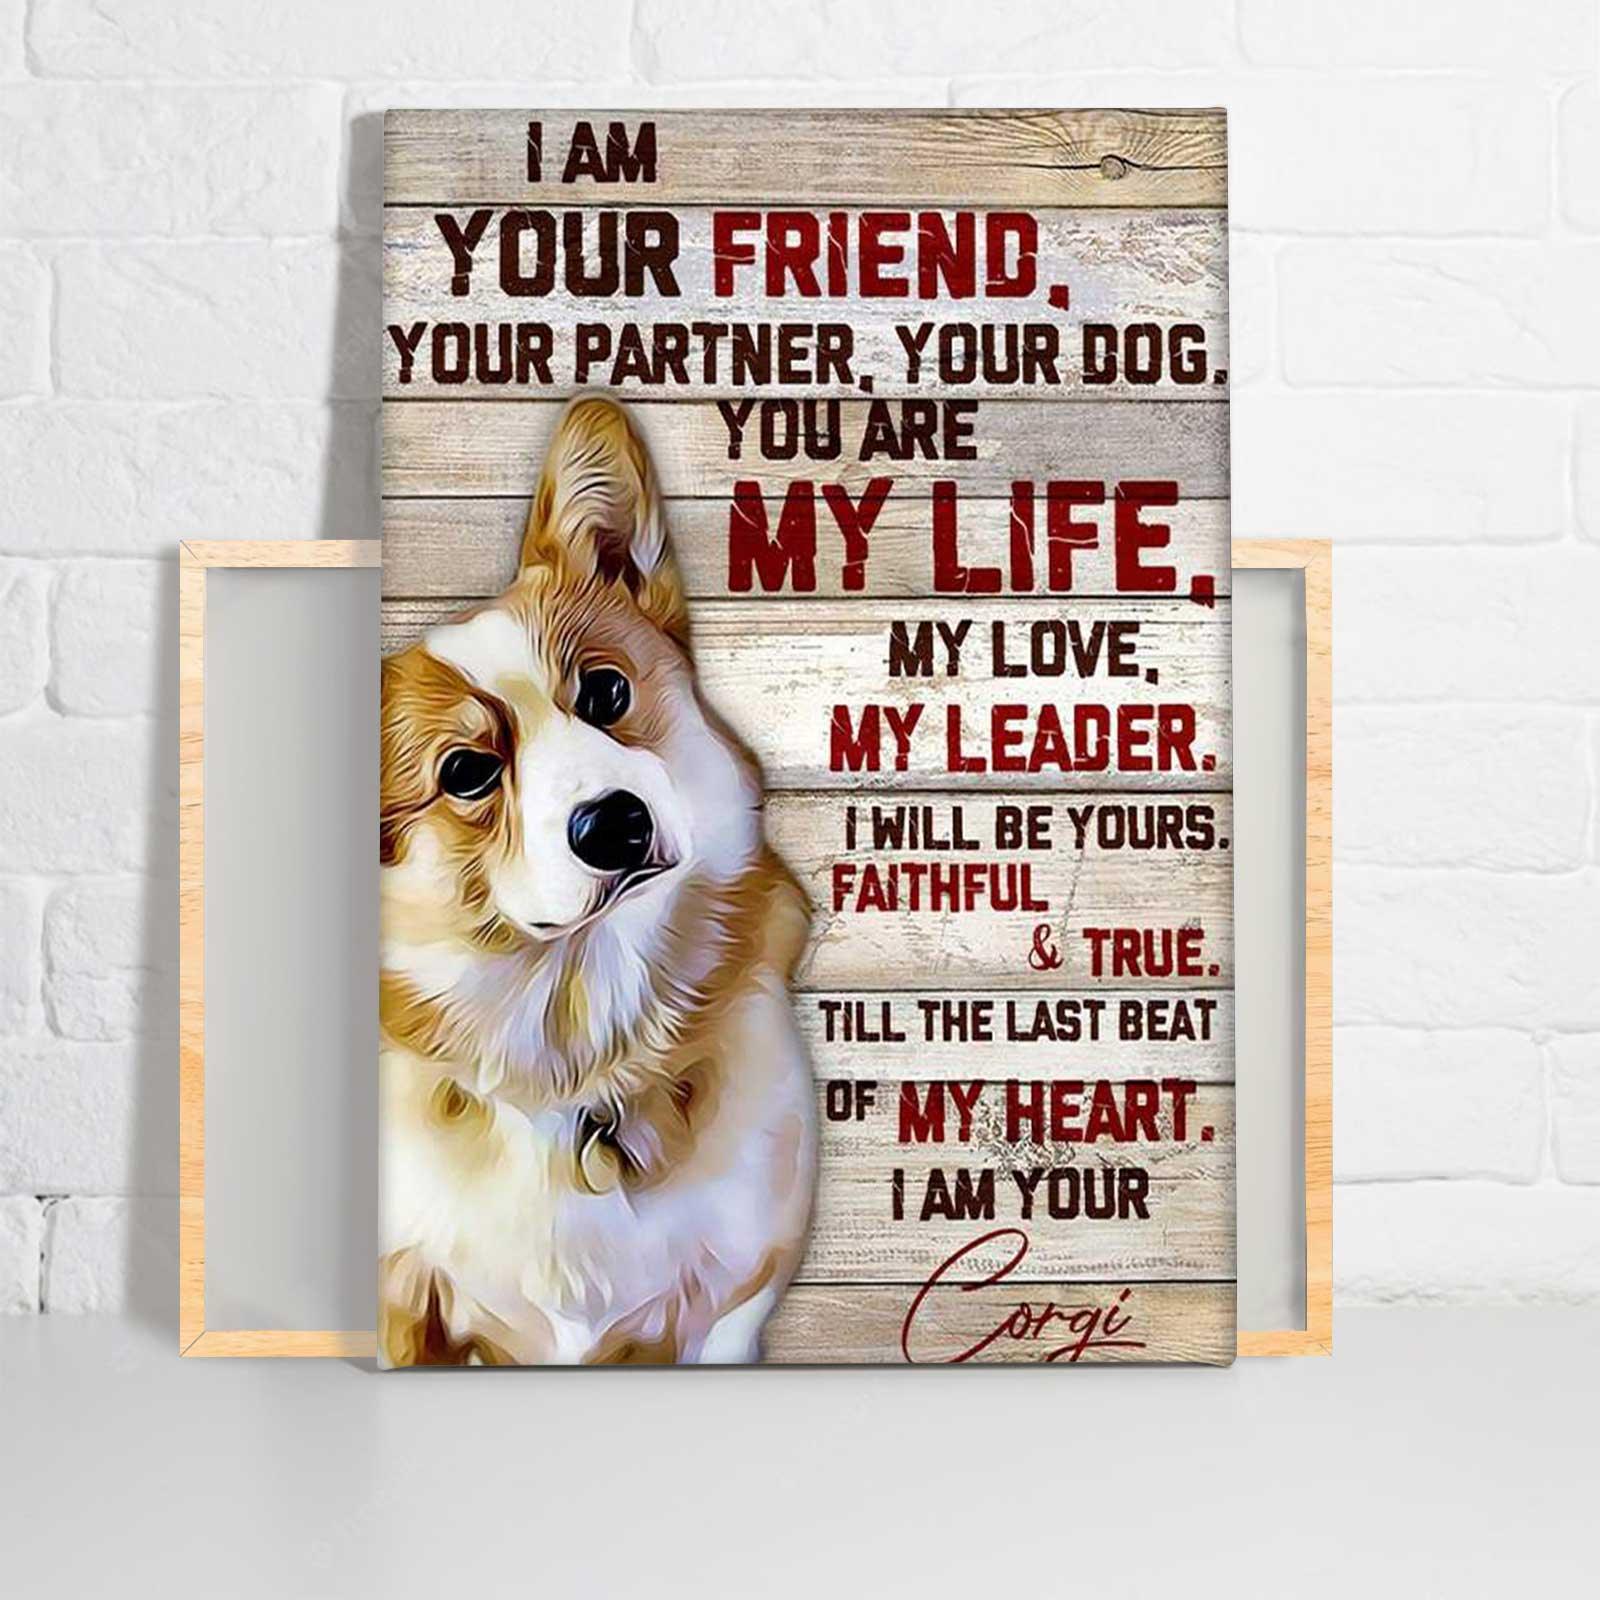 Corgi Portrait Canvas - I Am Your Friend Your Partner Your Dog, You Are My Life Canvas - Perfect Gift For Corgi Lover, Friend, Family - Amzanimalsgift